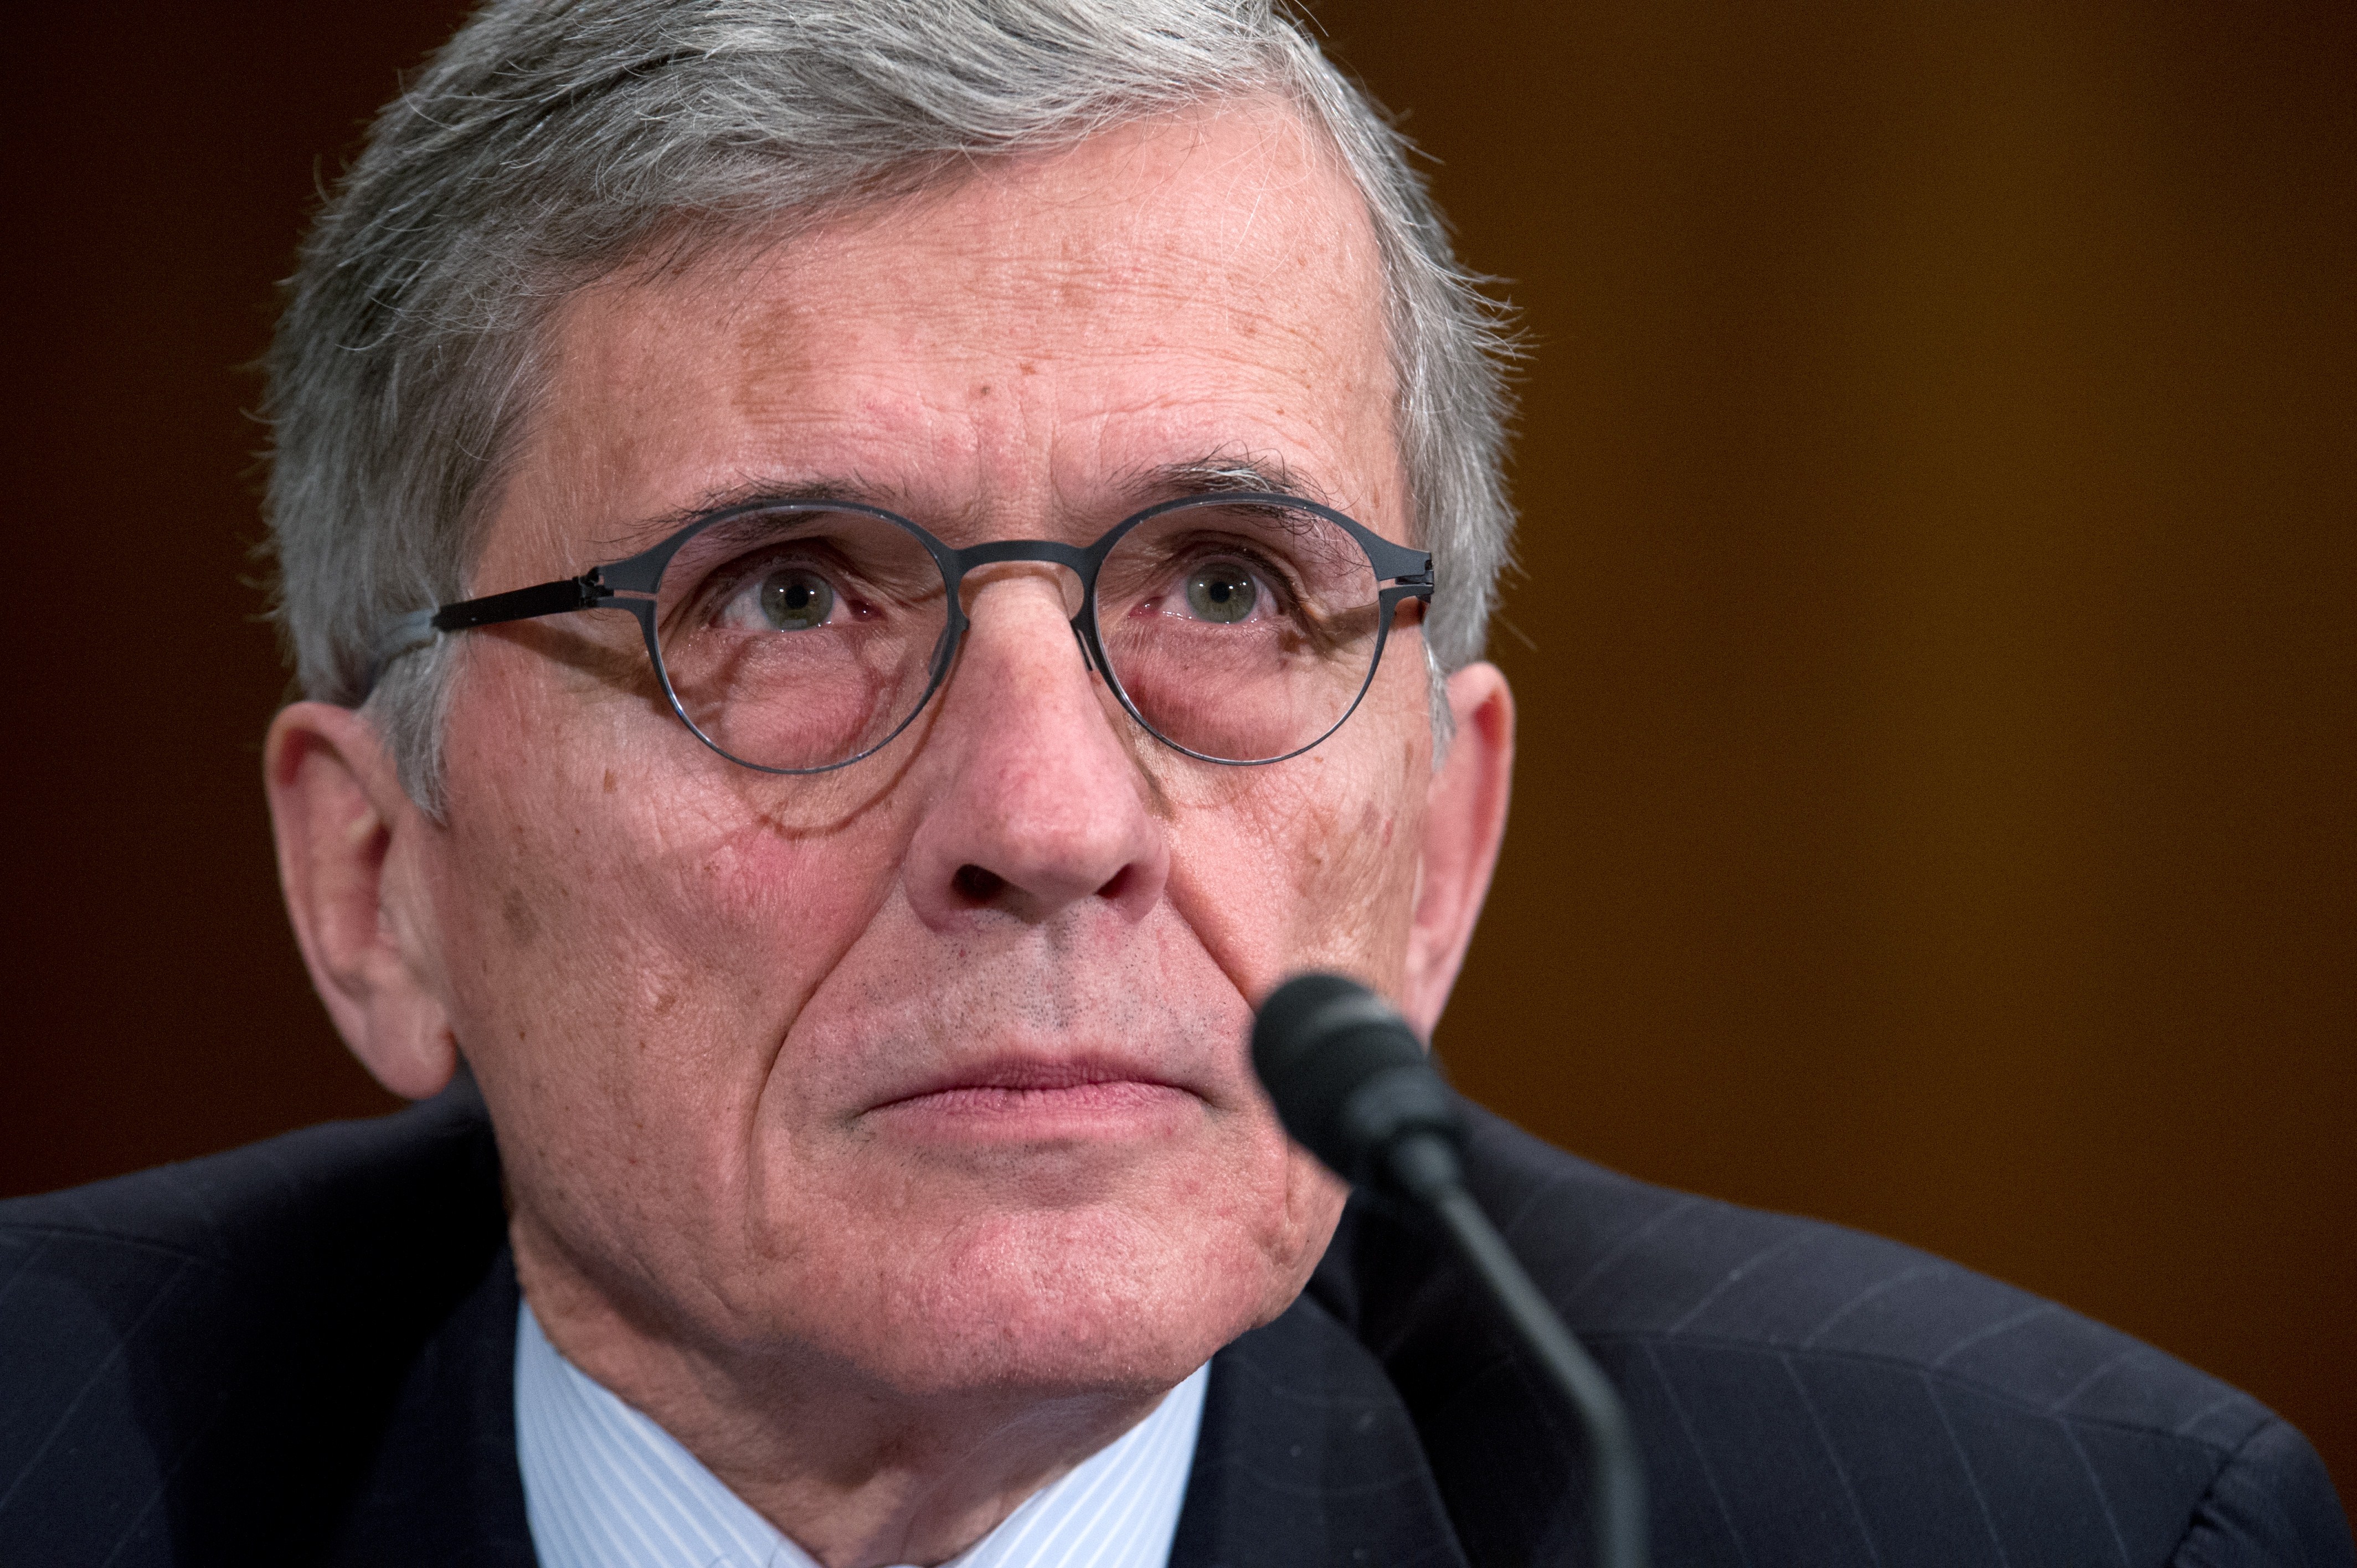 FCC Chairman Tom Wheeler gives testimony before the Financial Services and General Government Subcommittee hearing on "Review of the President's FY2015 funding request and budget justification for the Federal Communications Commission (FCC)."on March 27, 2014 on Capitol Hill in Washington, D.C. (Karen Bleier—AFP/Getty Images)